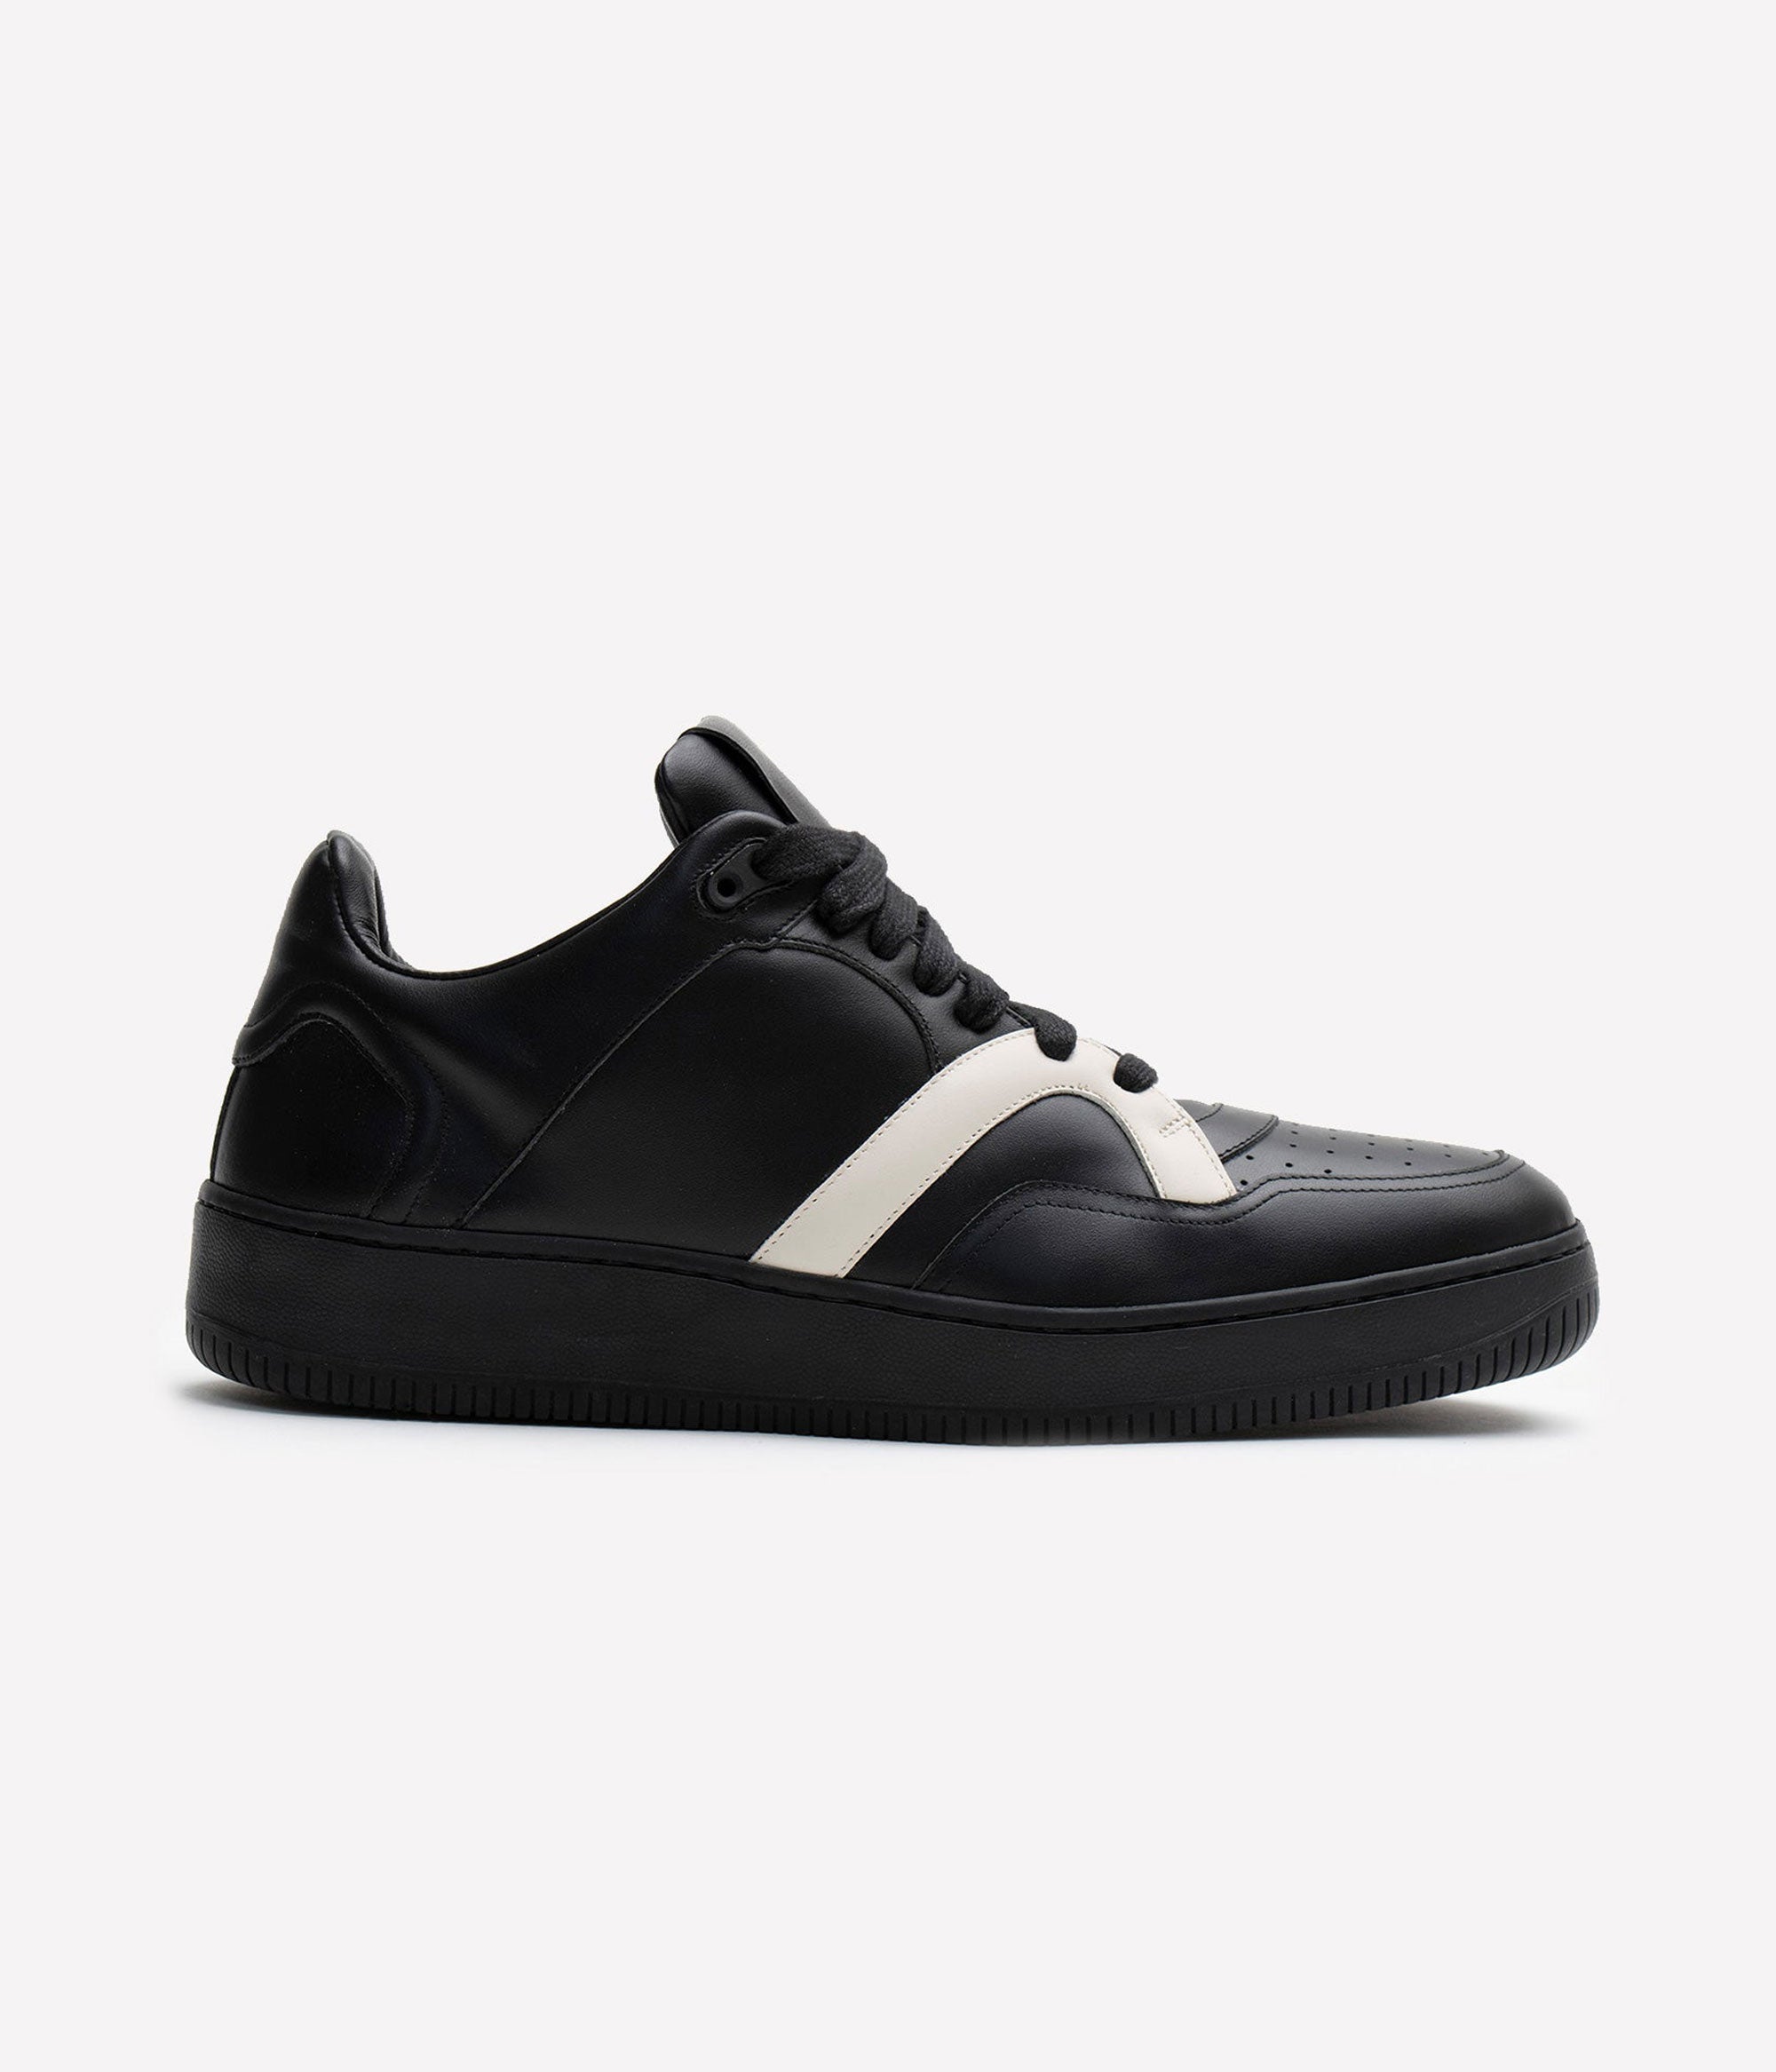 HUMAN RECREATIONAL SERVICES MONGOOSE LOW SHOE IN BLACK AND BONE MADE WITH ITALIAN CALF SKIN